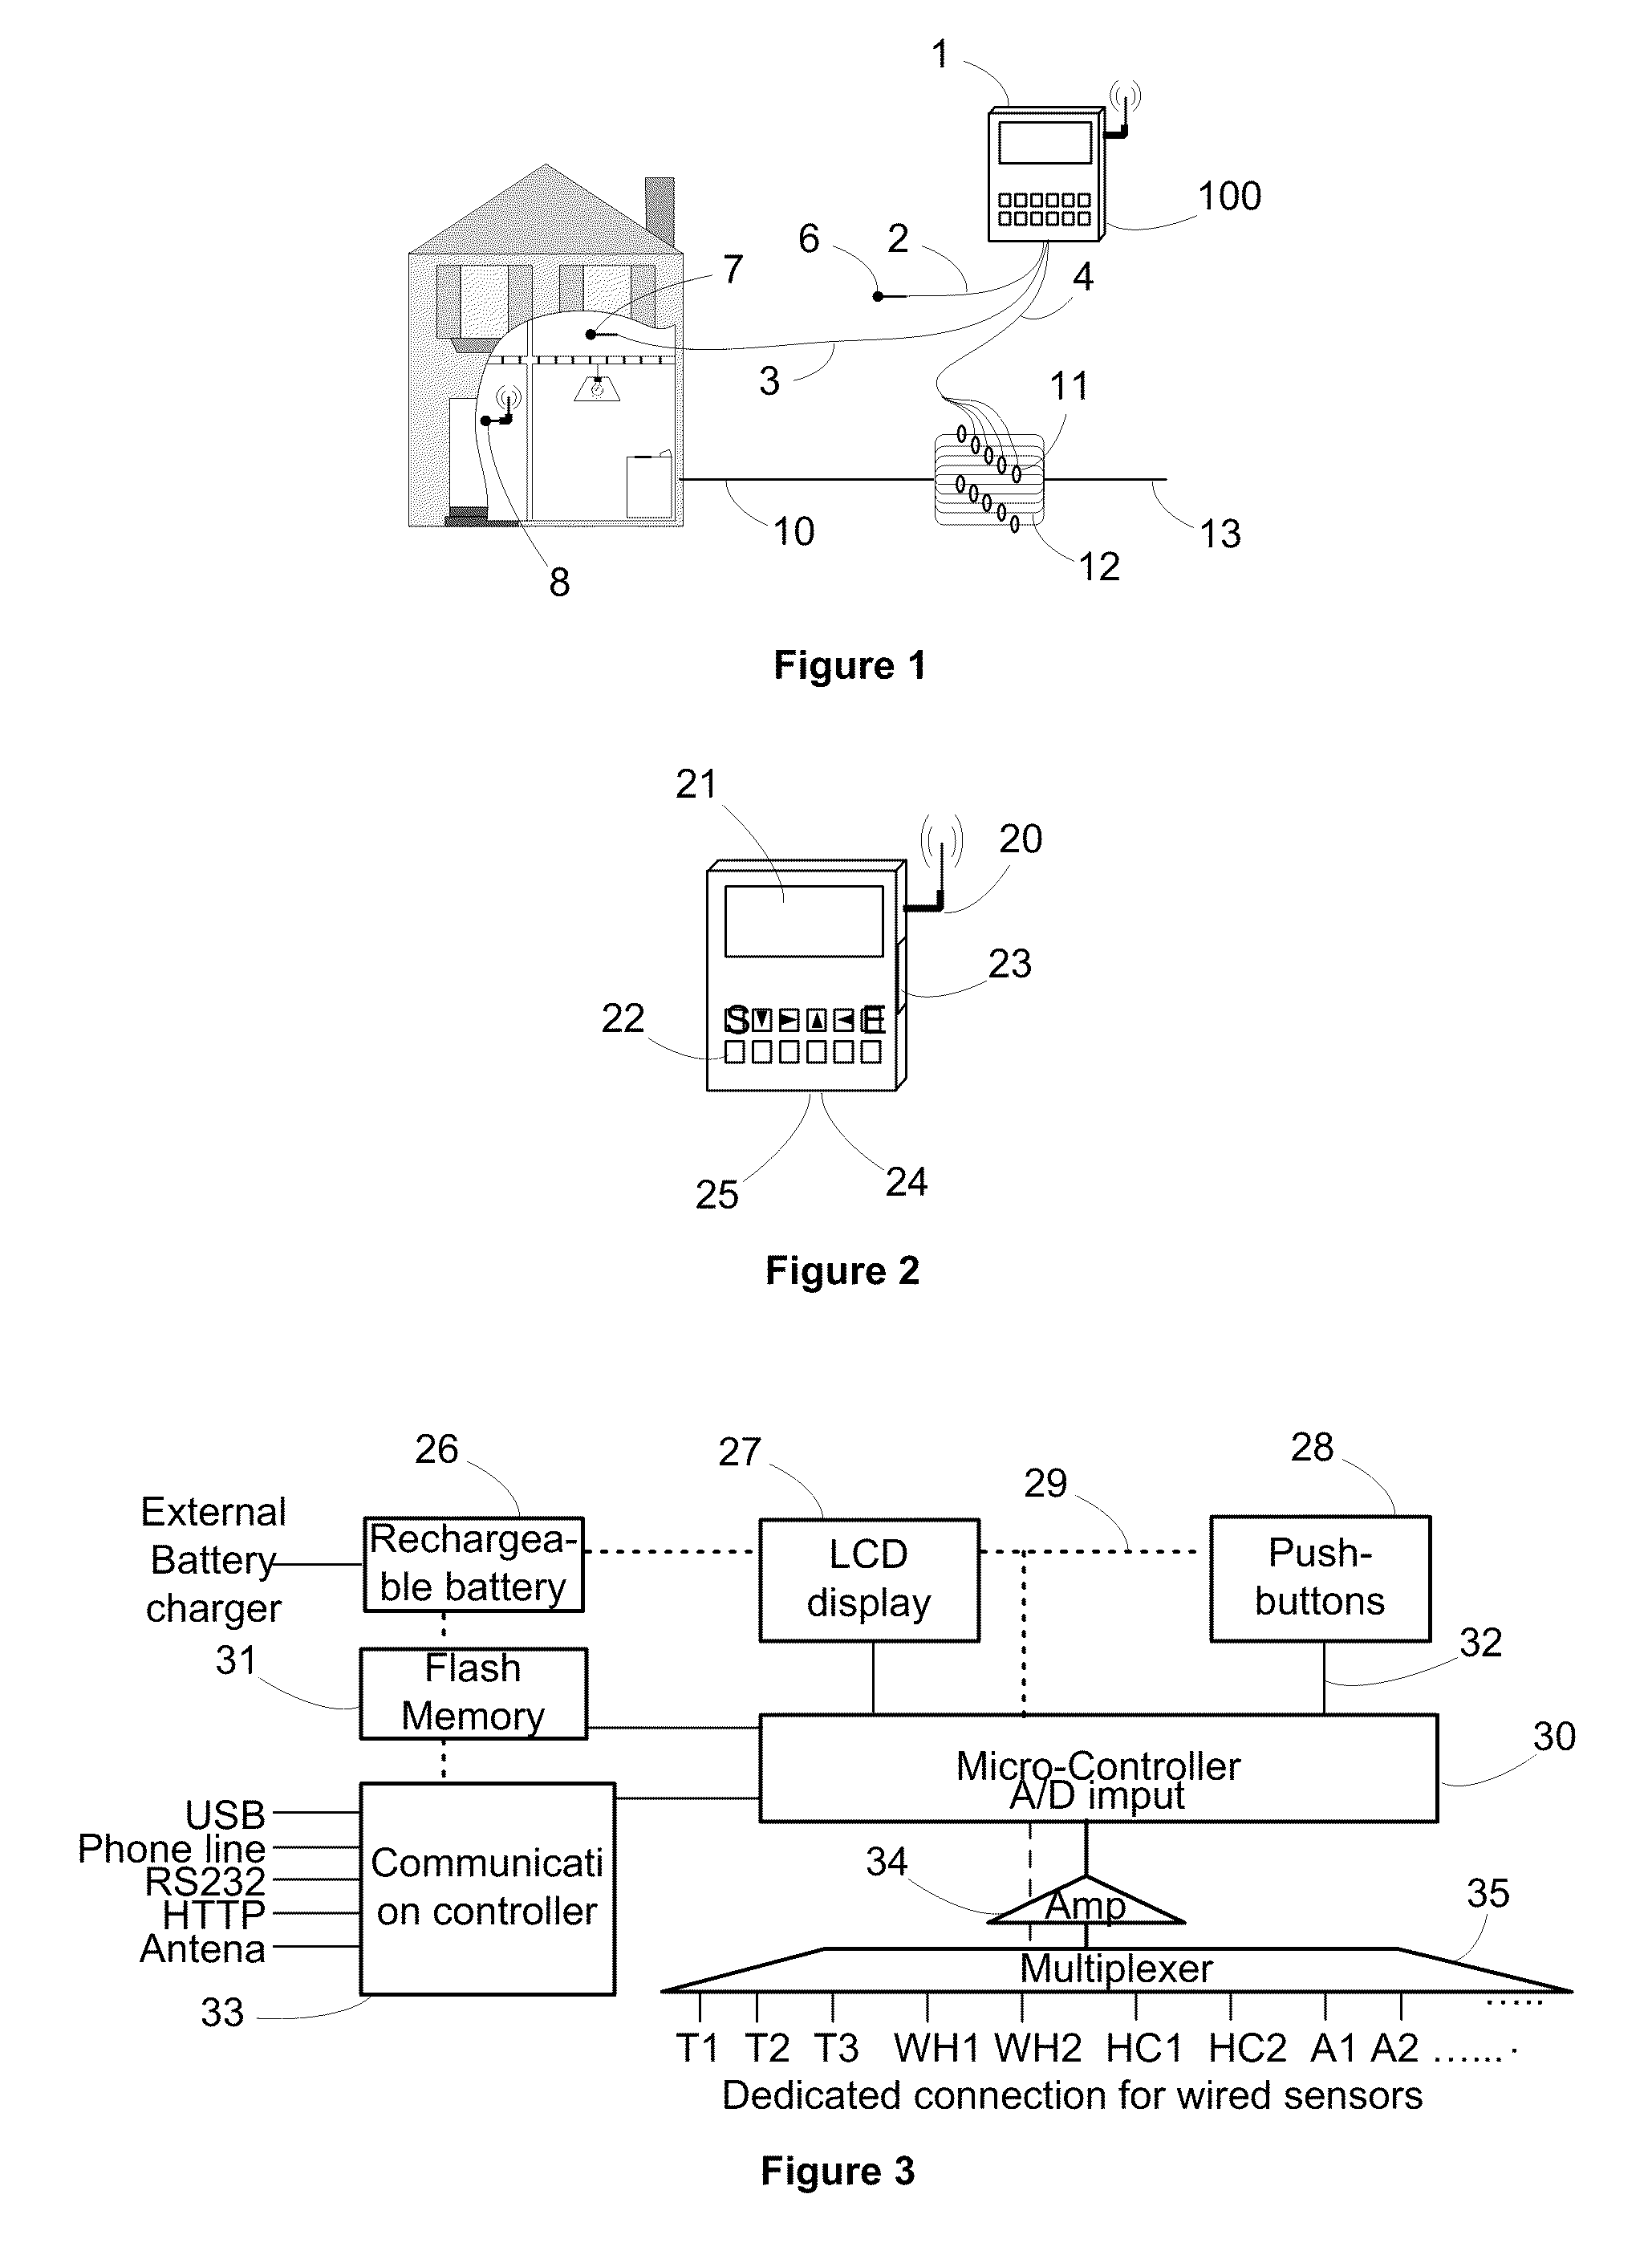 Method and apparatus for comprehensive energy measurement and analysis of a building